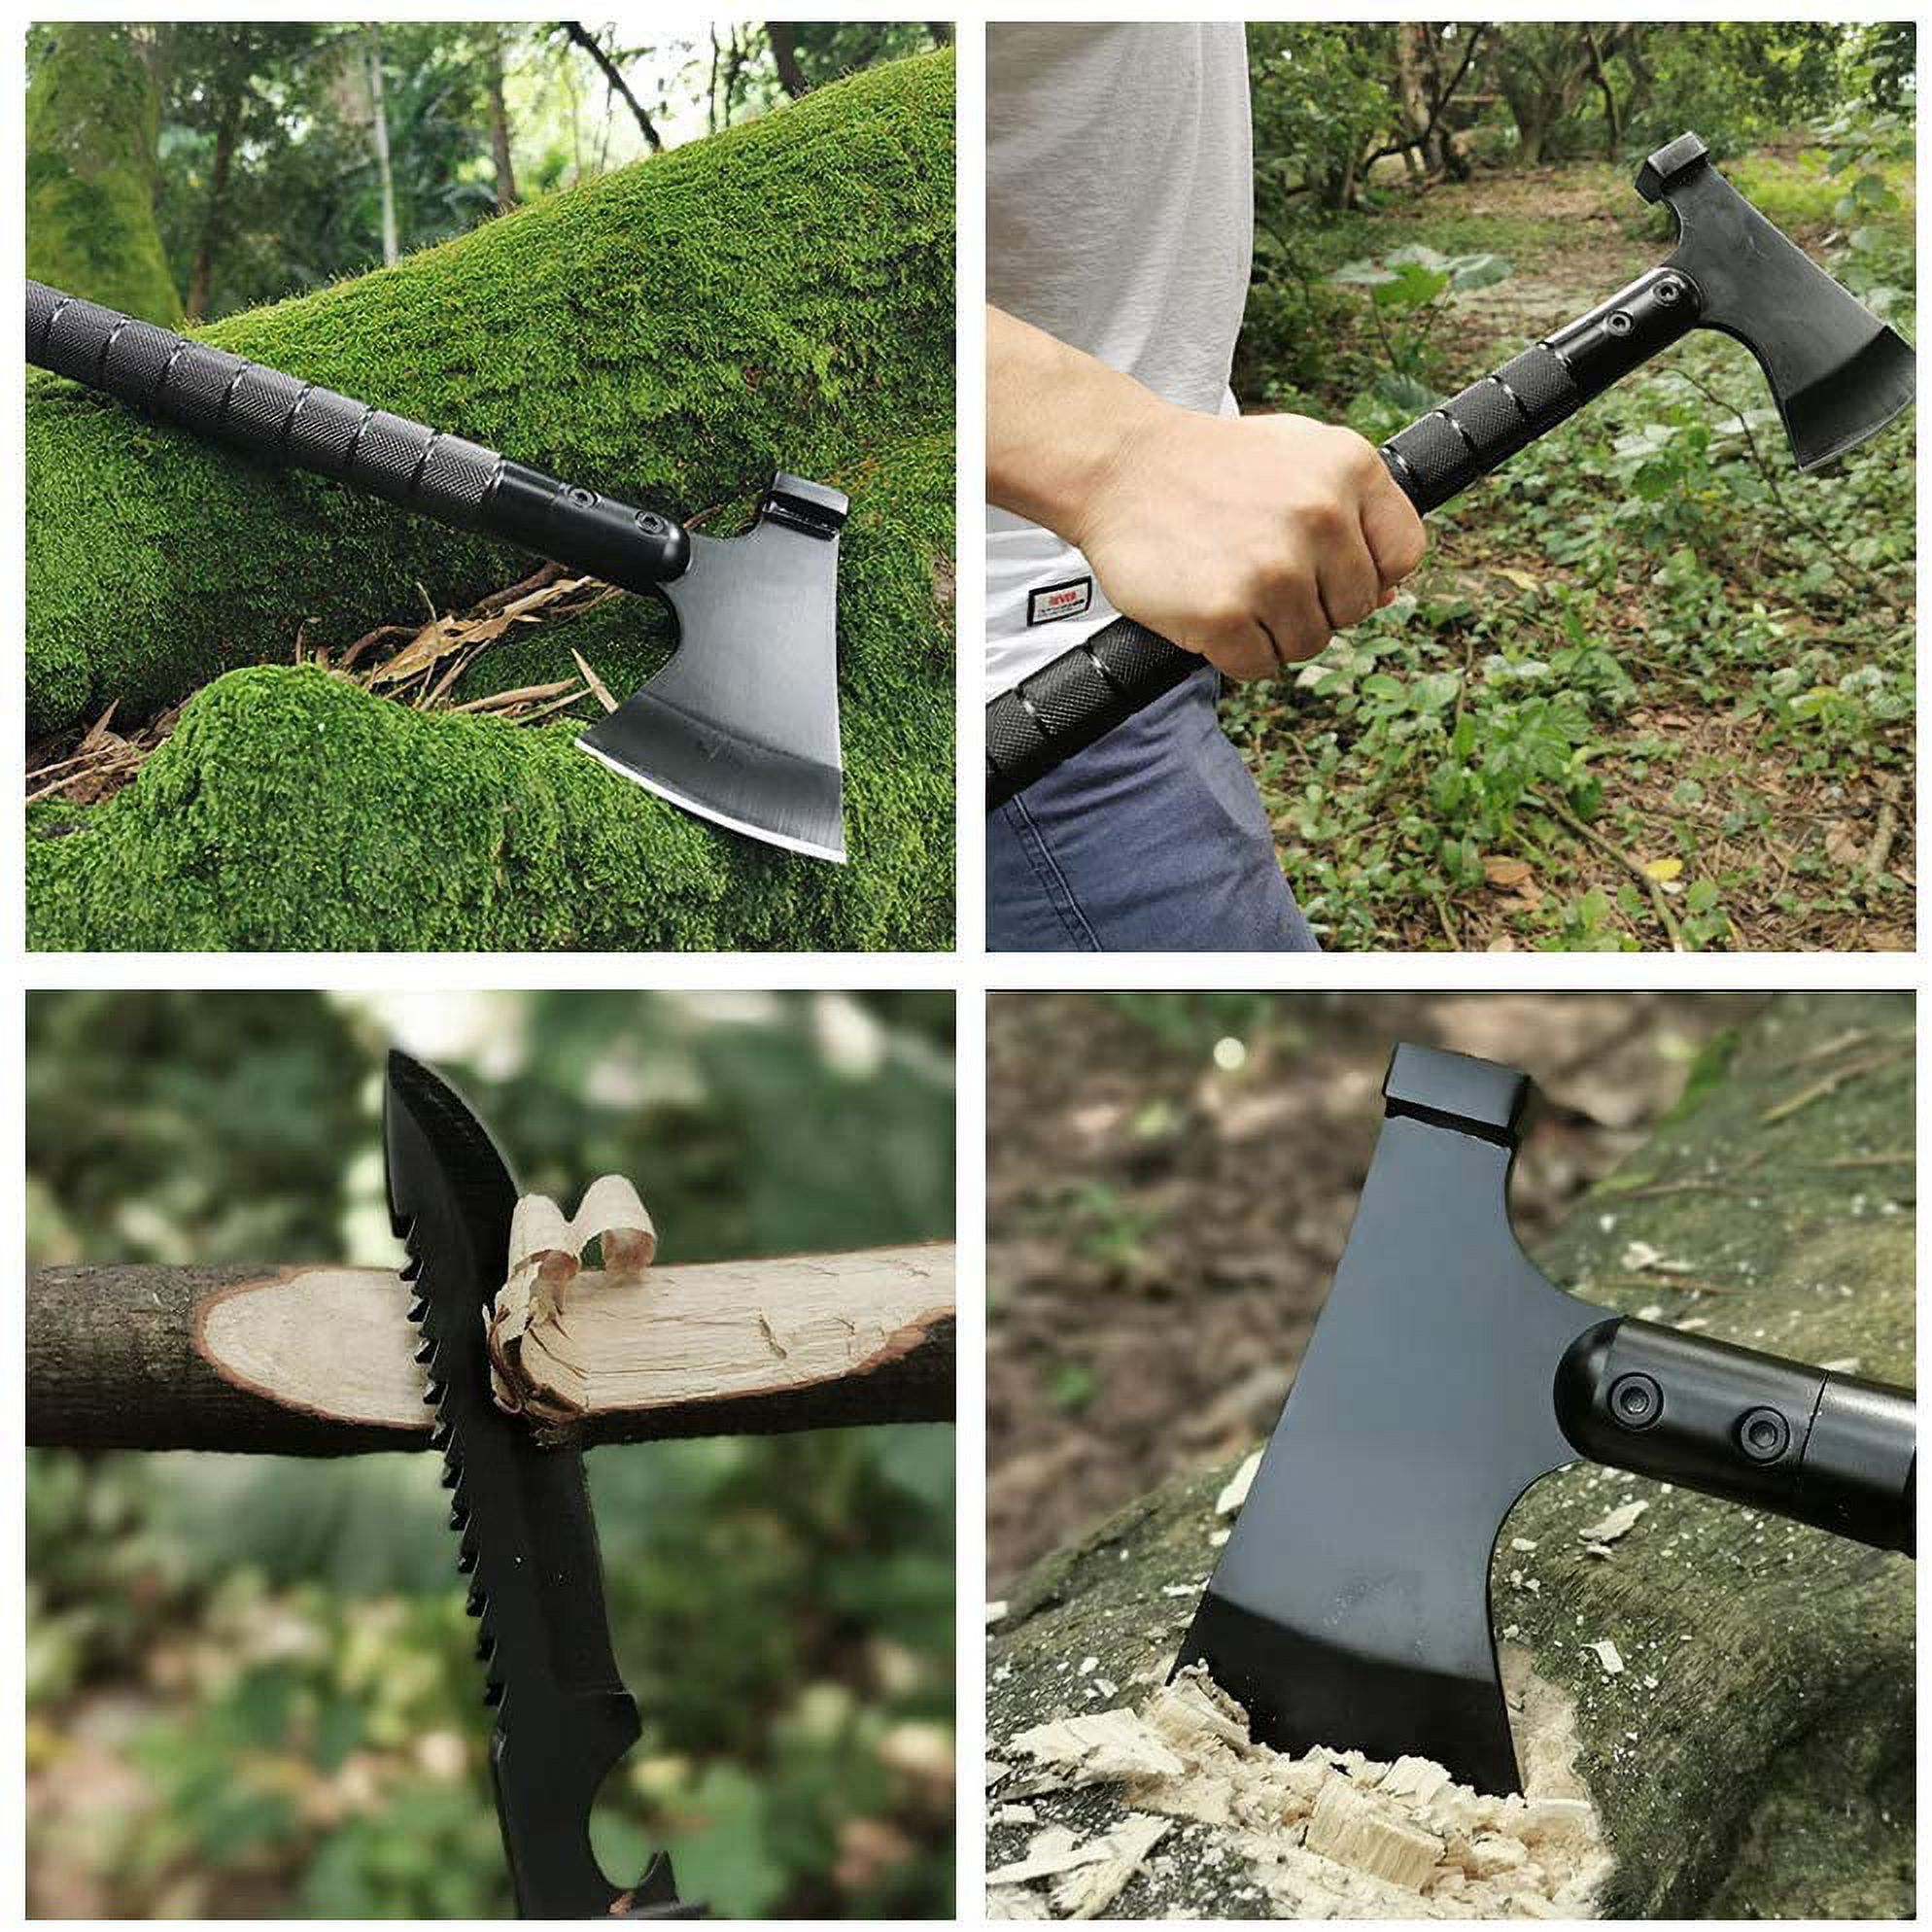 Survival Axe Portable Camping Axe Multi-Tool Hatchet Survival Kit - image 5 of 7